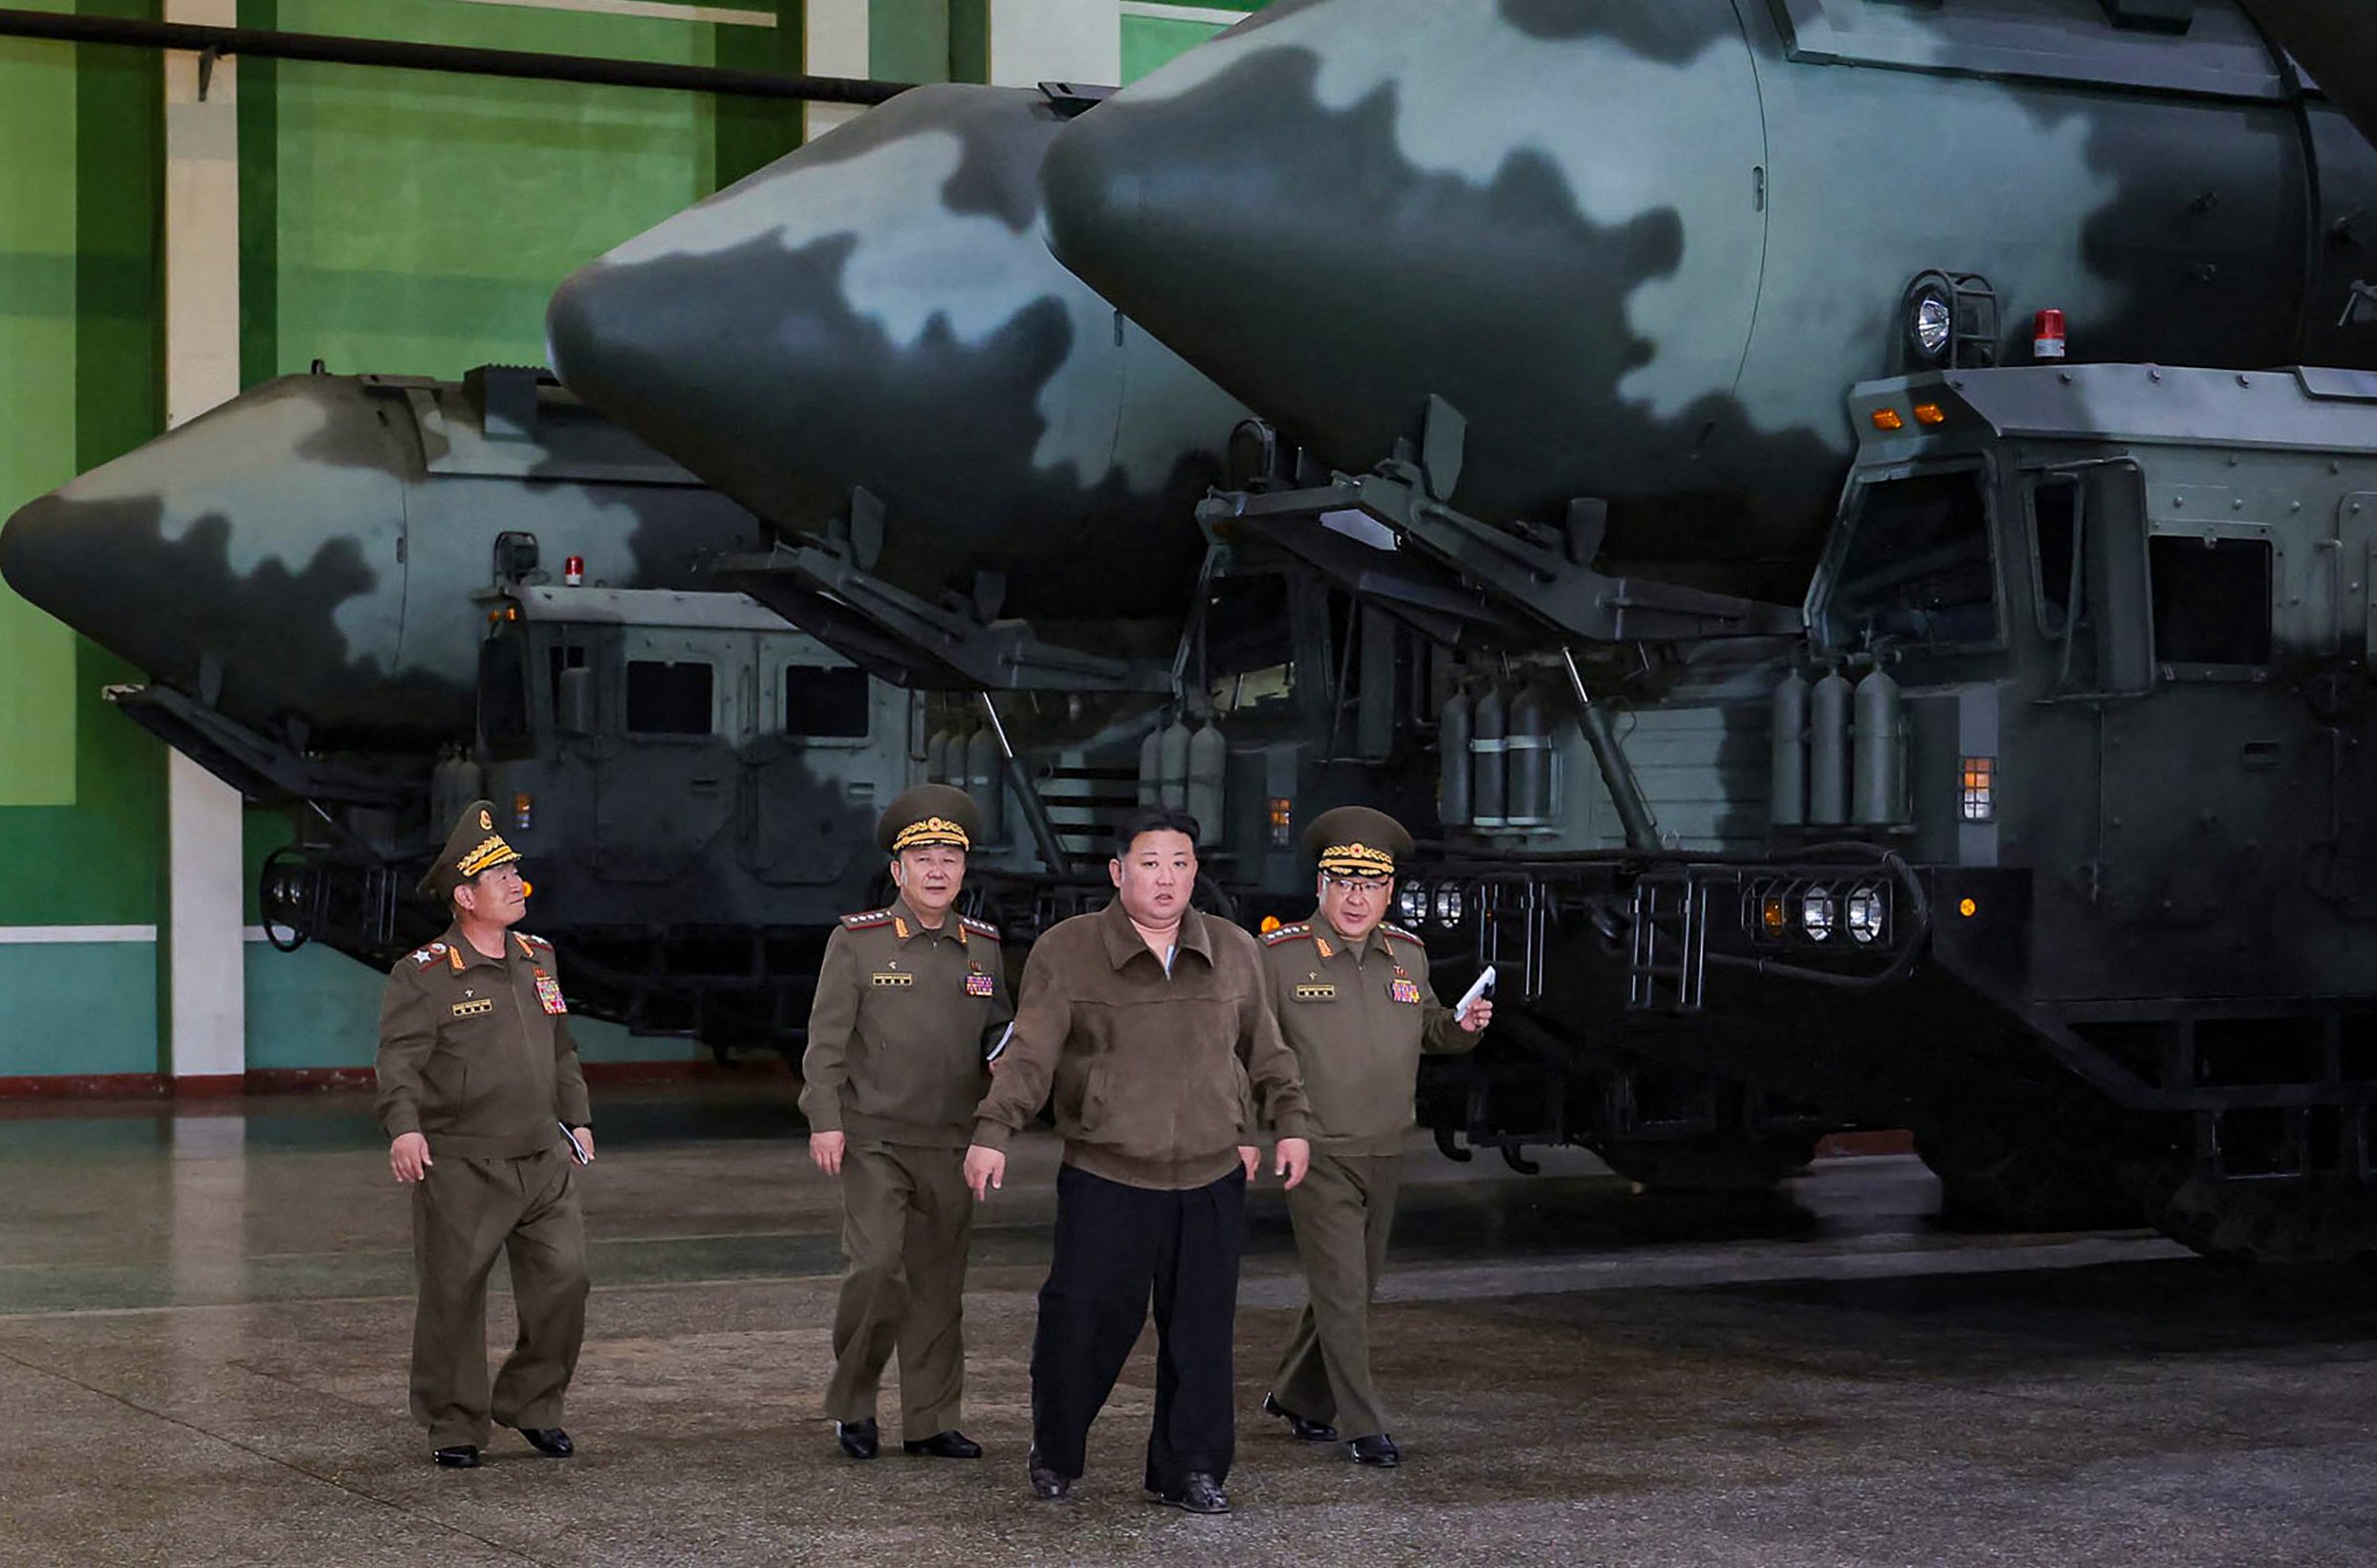 North Korean leader Kim Jong-un visits a defence industrial complex at an undisclosed location in North Korea on May 17. US intelligence has suggested a possible election-year provocation from Pyongyang to “create turmoil … possibly at the urging of Russian President Vladimir Putin”. Photo: AFP/KCNA via KNS 